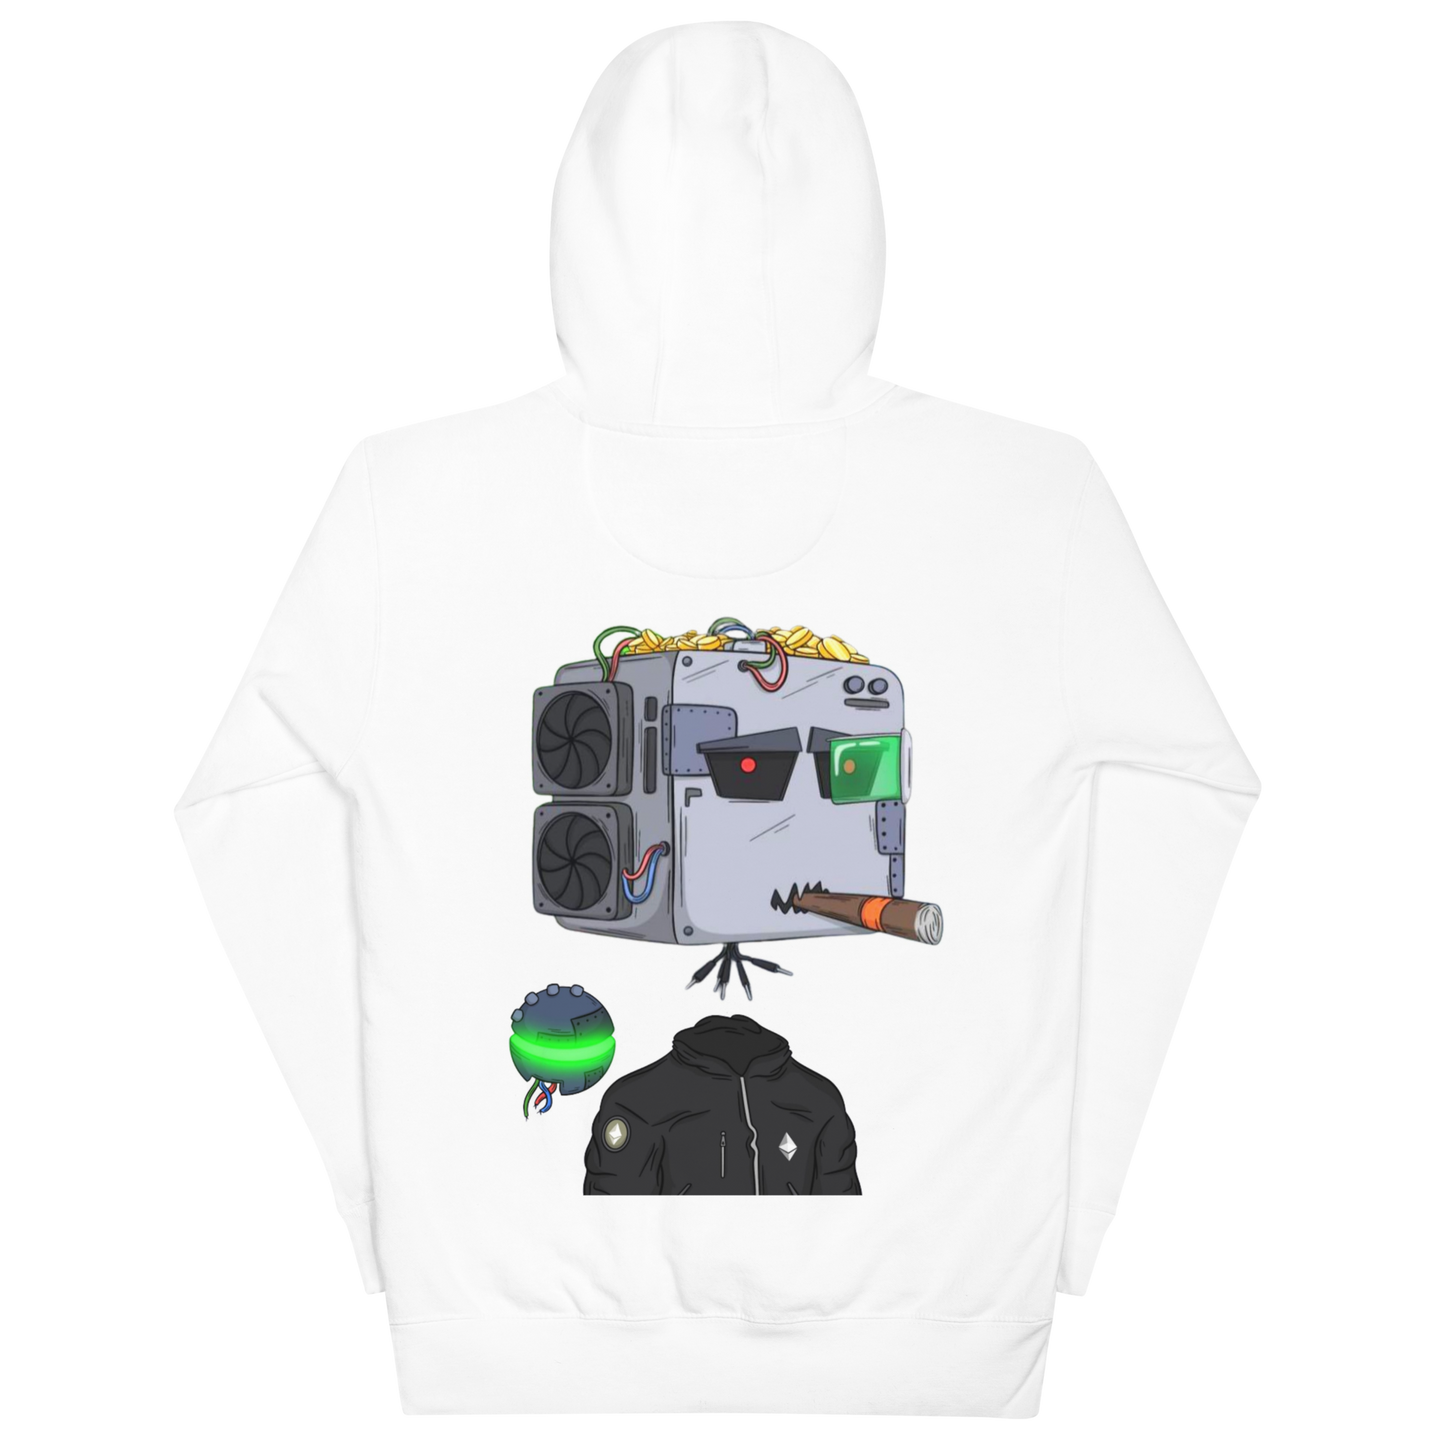 Ace Miners "Stoned Miner" 3D Puff Graphic Hoodie